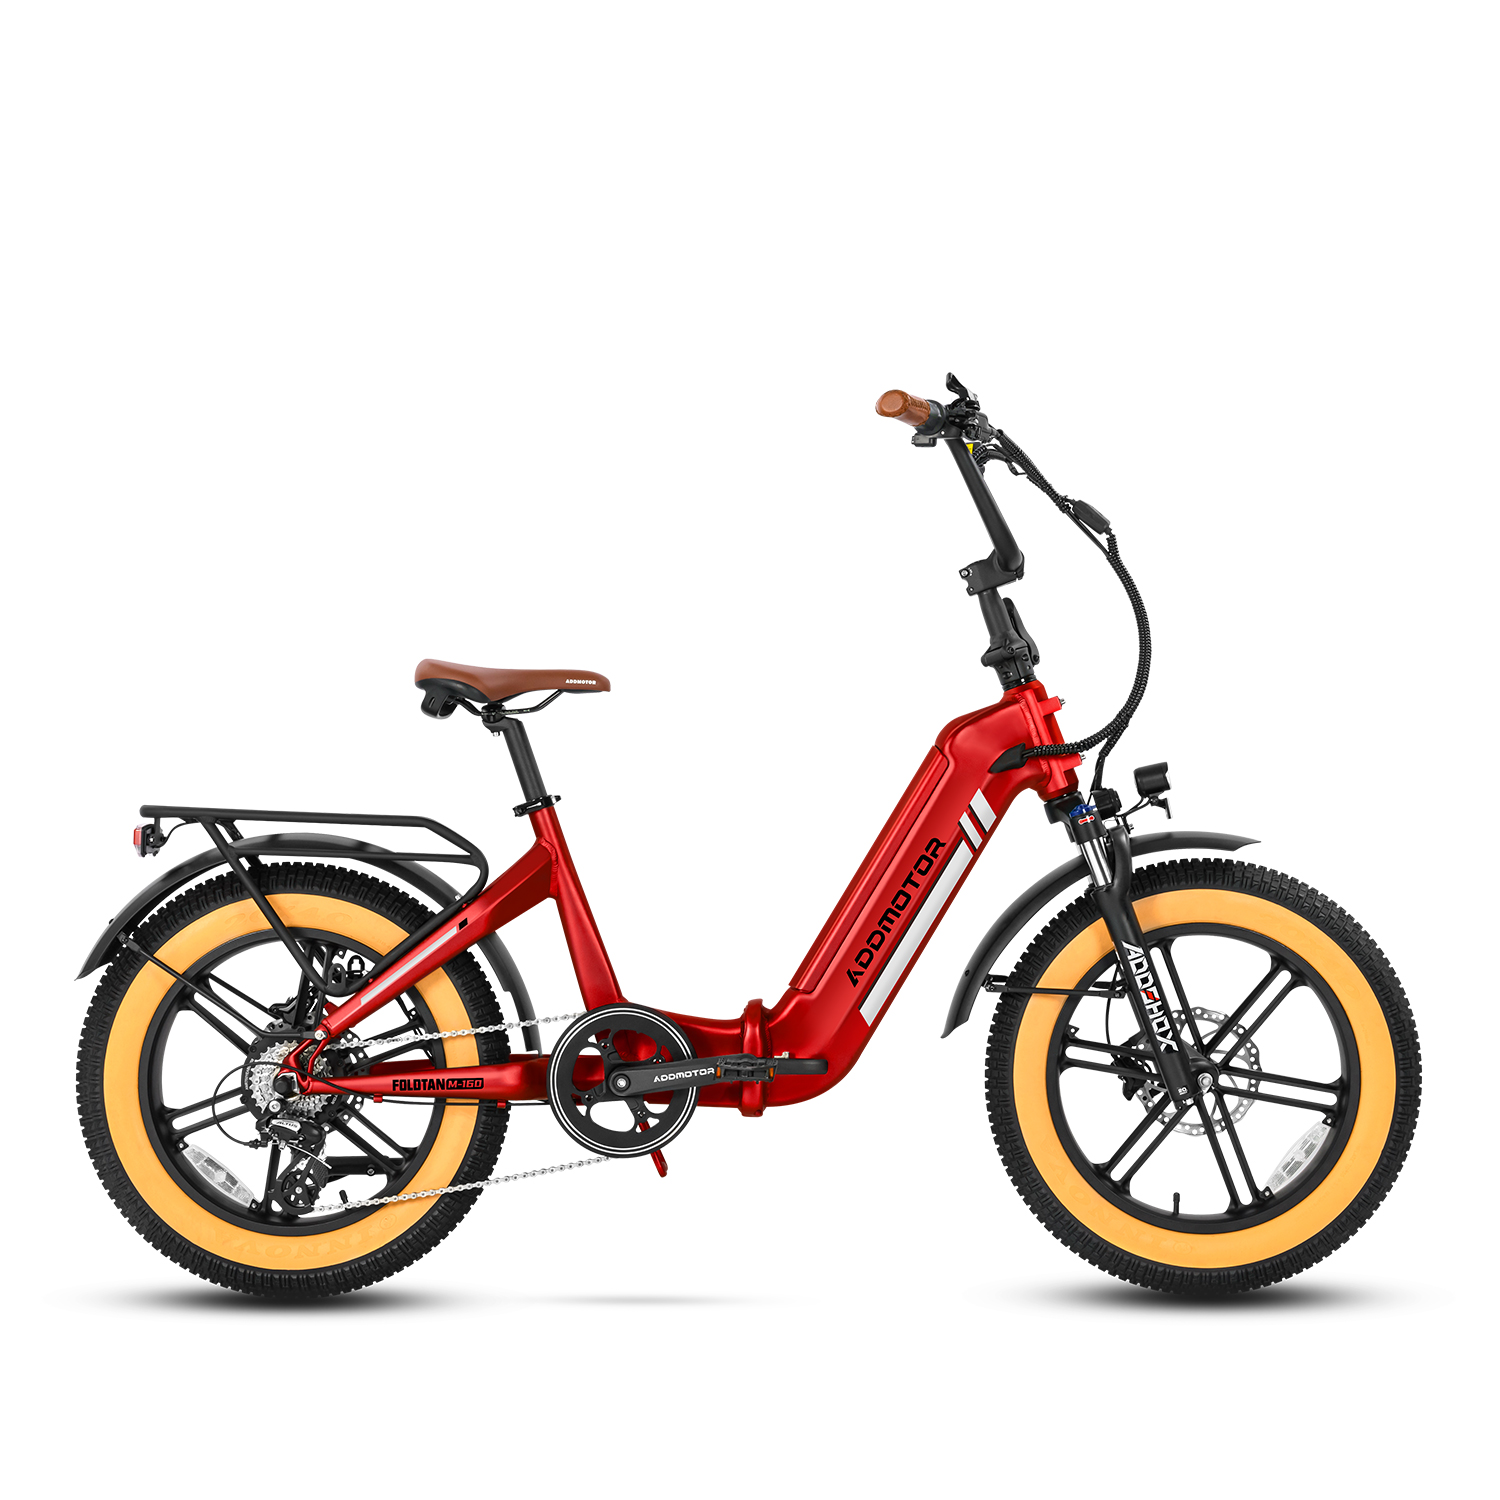 Addmotor Folding Electric Bike with Fat Tire Foldtan M-160 Built-In Battery Folding Ebikes, Red